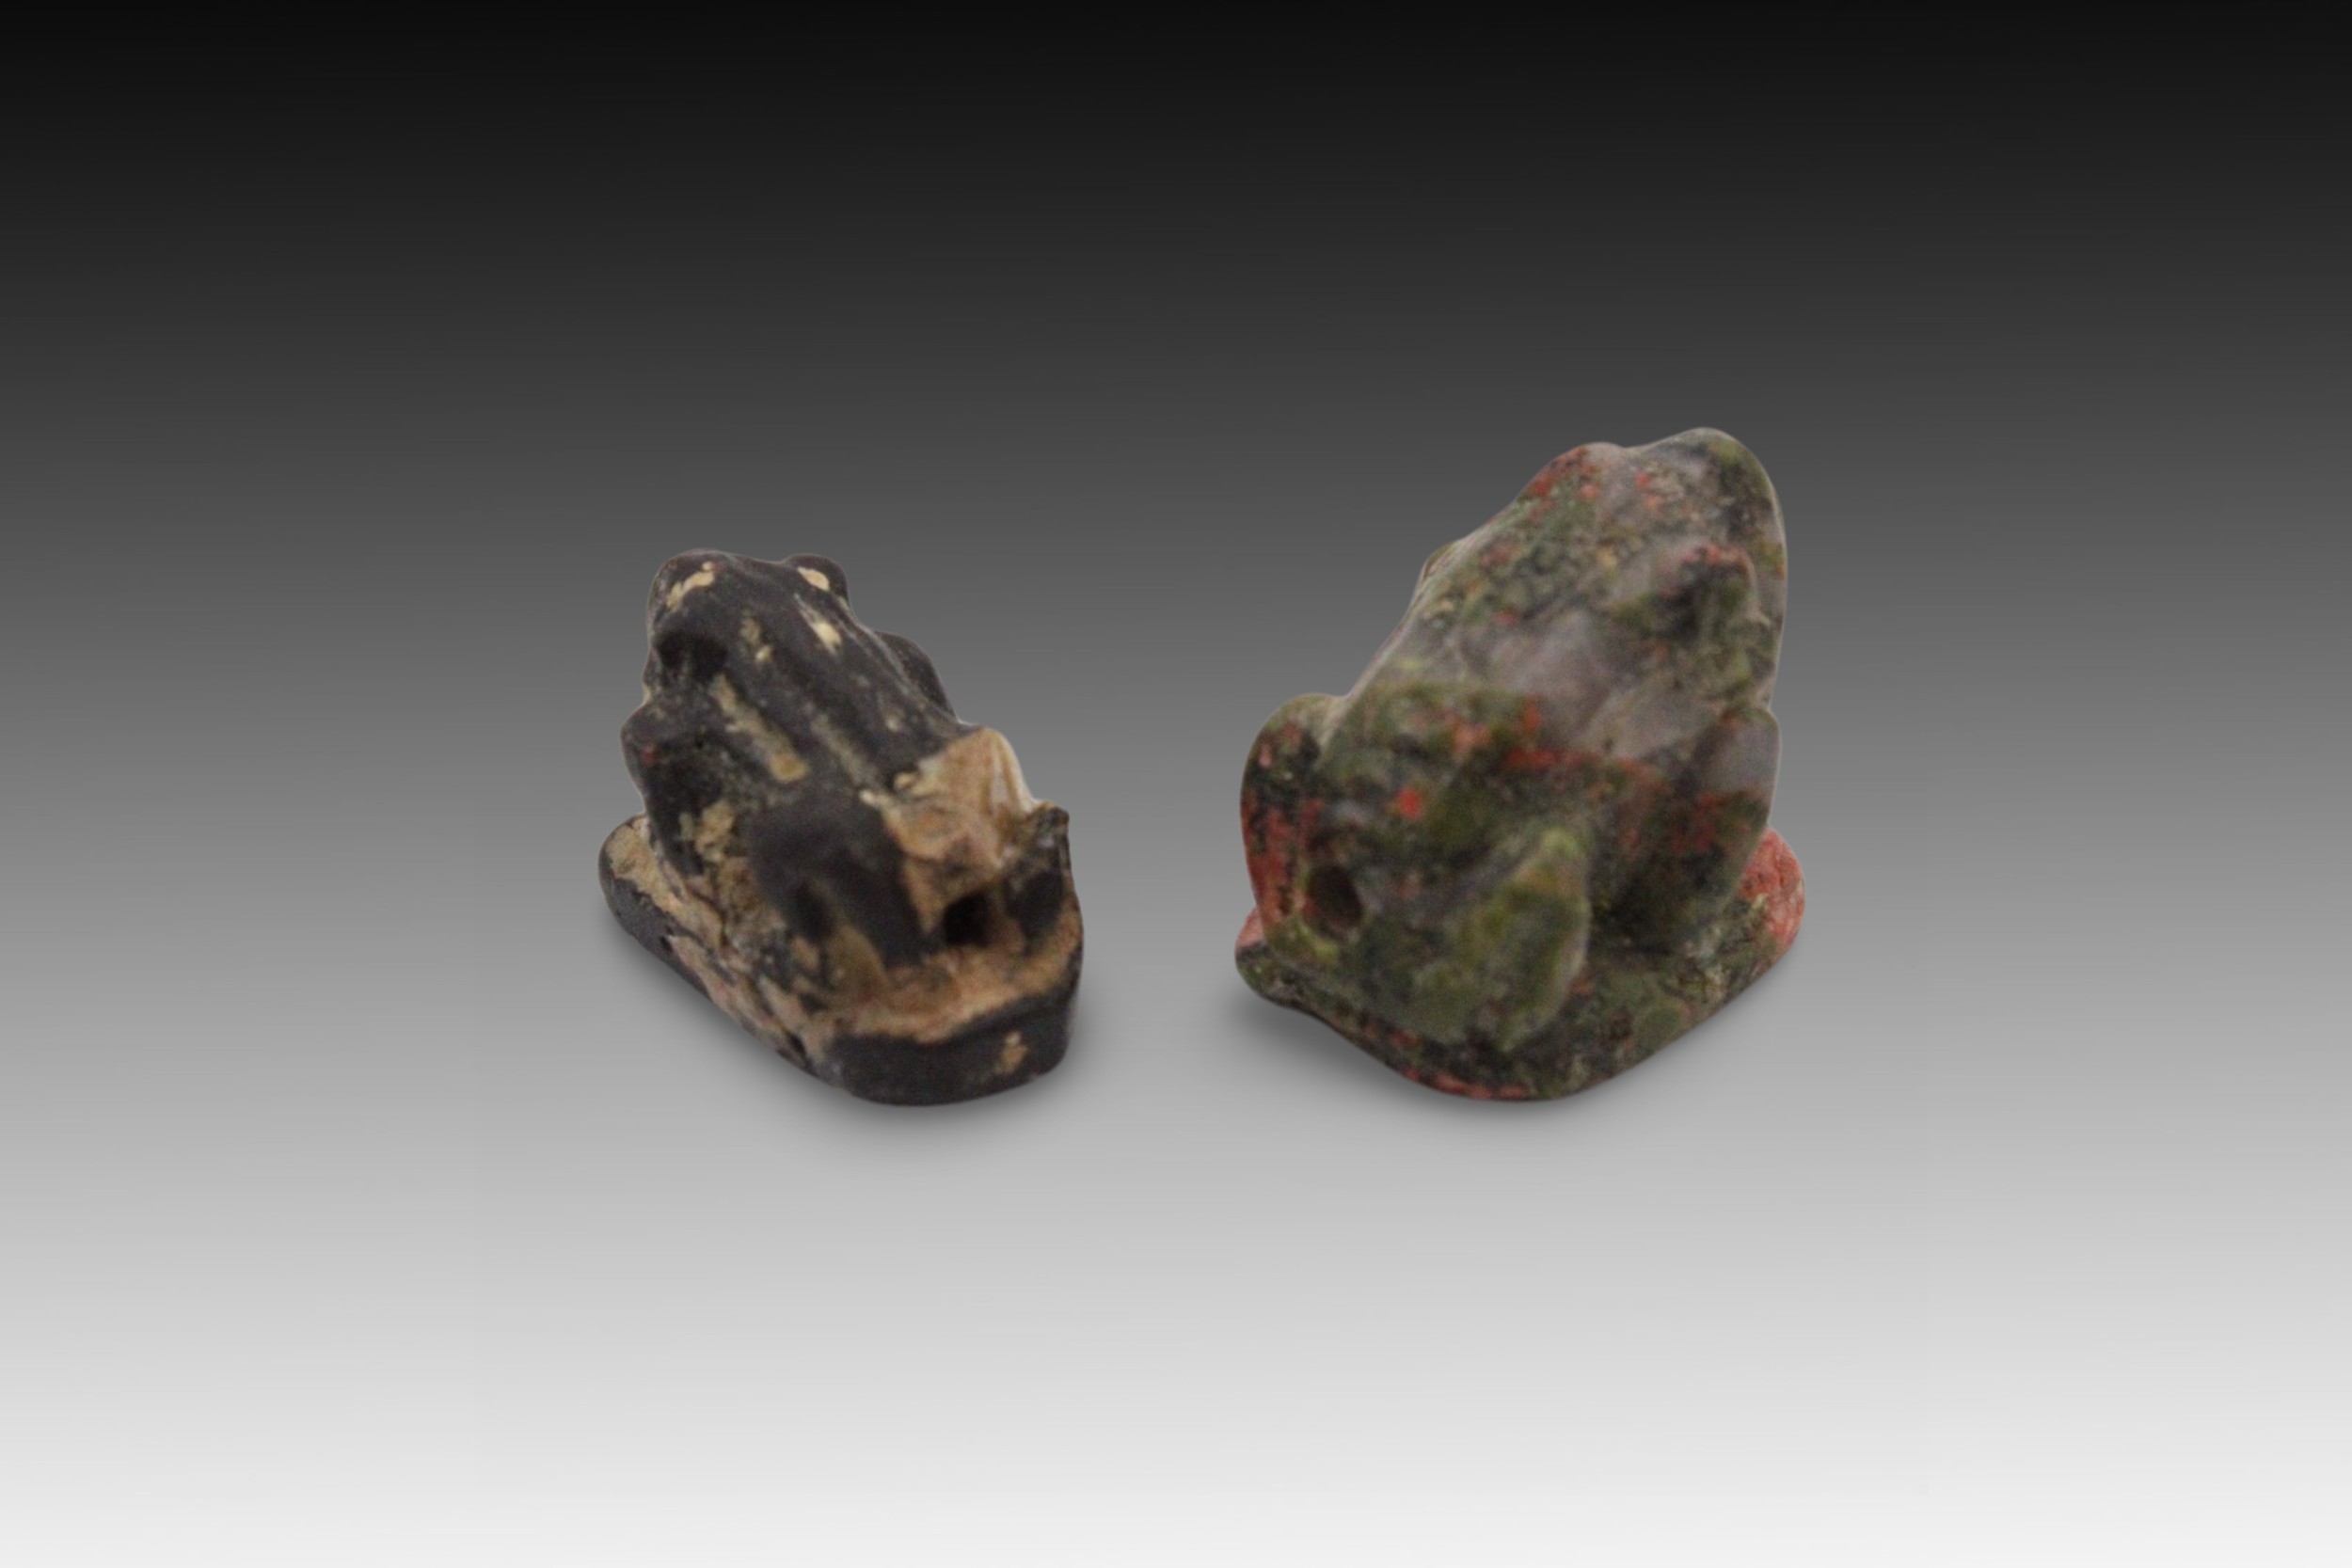 2 Ancient Egyptian Amulets- One Granite Frog, One Blackstone Frog Height of Granite Frog: Approxim - Image 2 of 2